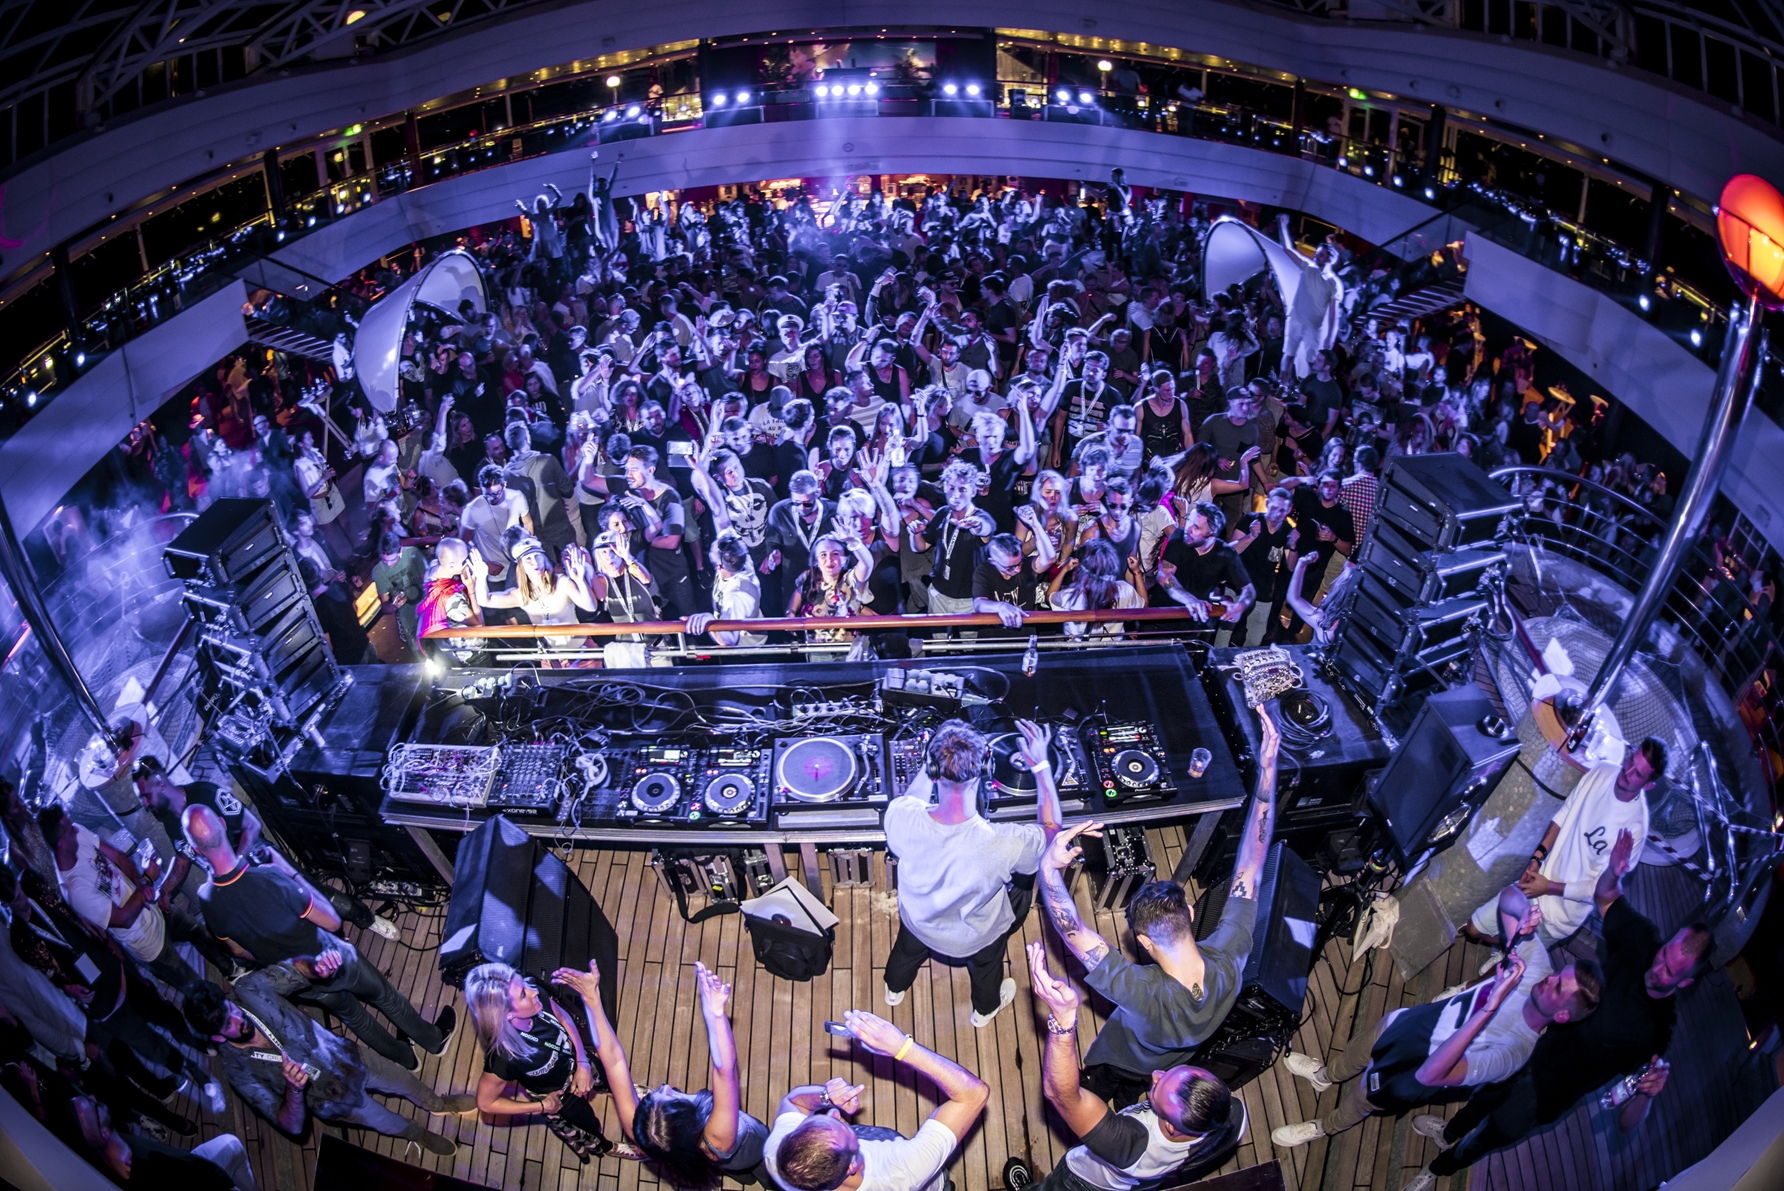 MDRNTY Cruise: 12 insanely amazing photos from the world’s wildest party boat